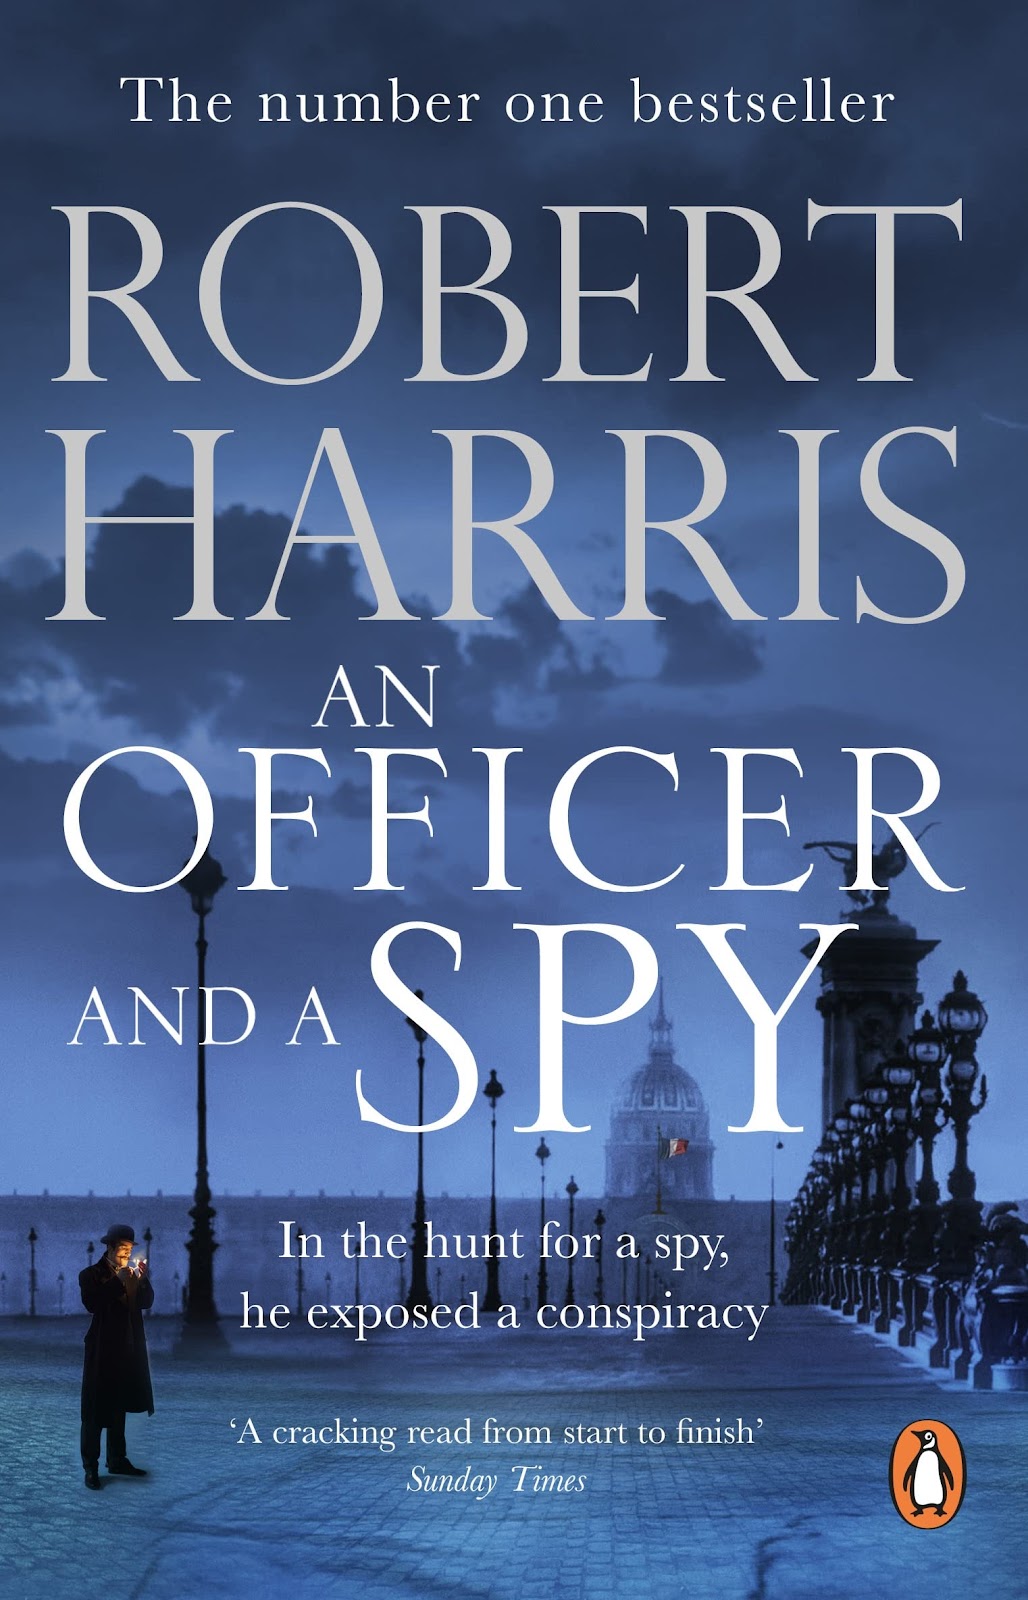 Book cover for An Officer and a Spy by Robert Harris An Officer and a Spy in the South Manchester, Chorlton, Cheadle, Fallowfield, Burnage, Levenshulme, Heaton Moor, Heaton Mersey, Heaton Norris, Heaton Chapel, Northenden, and Didsbury book group